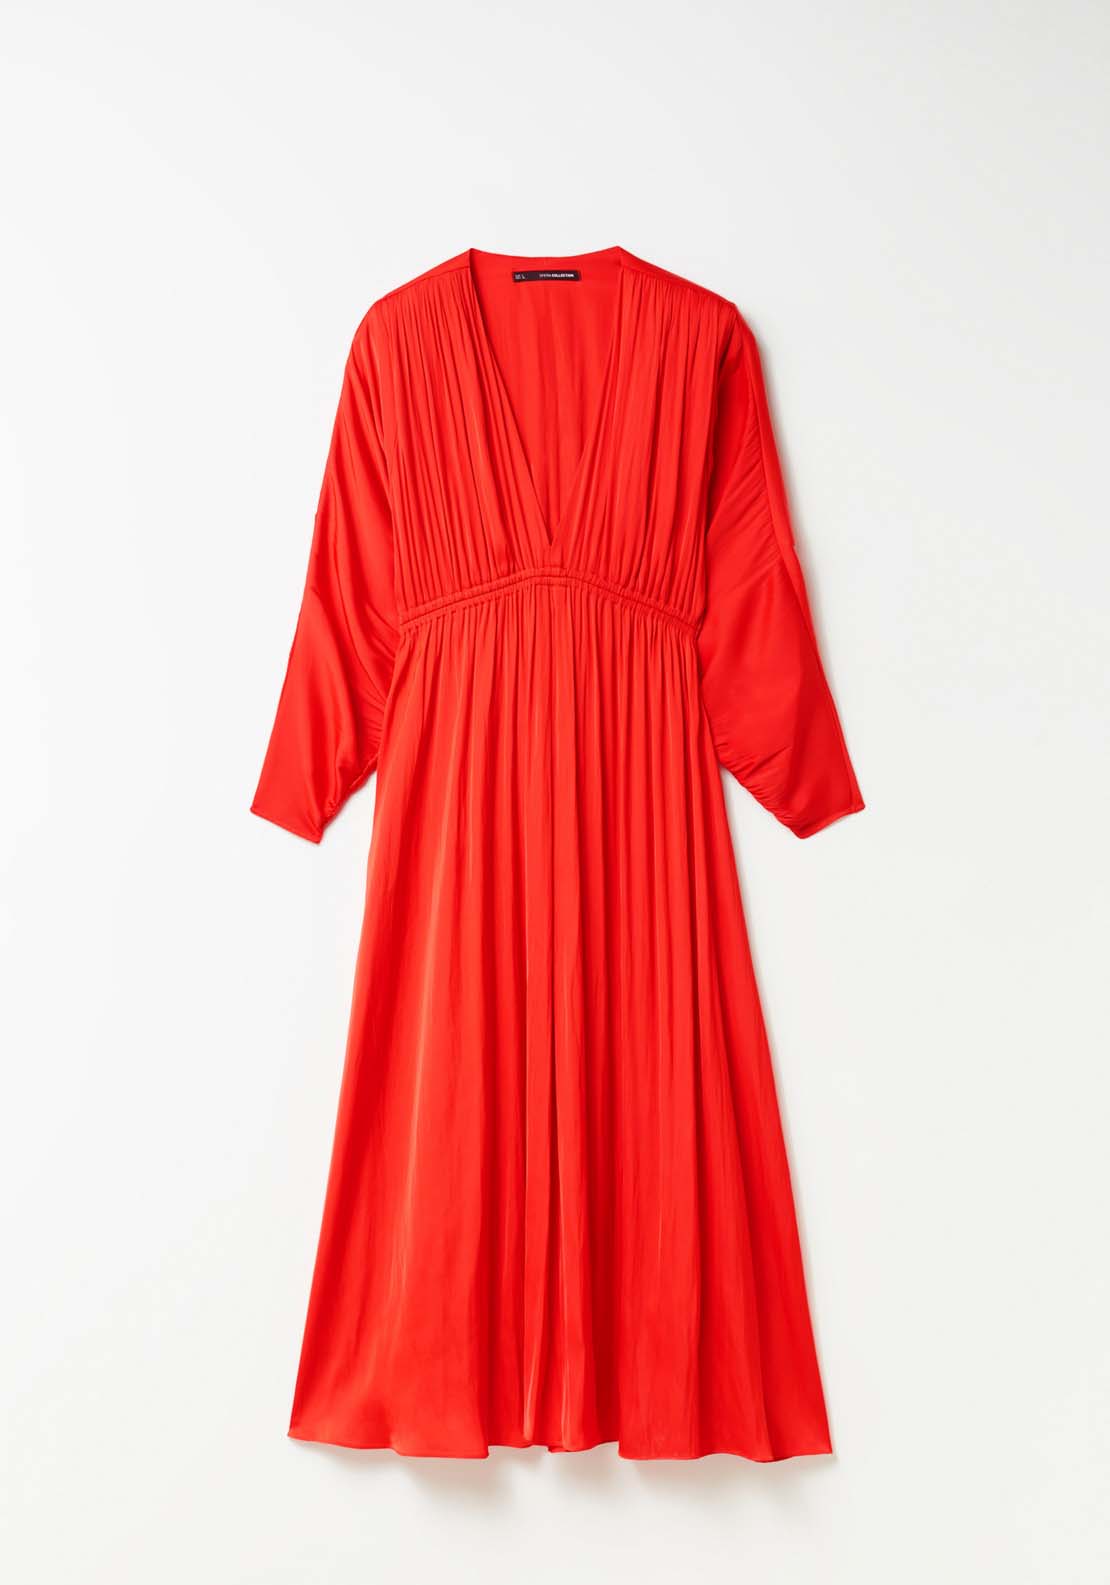 Sfera Midi dress with shoulder pads 6 Shaws Department Stores